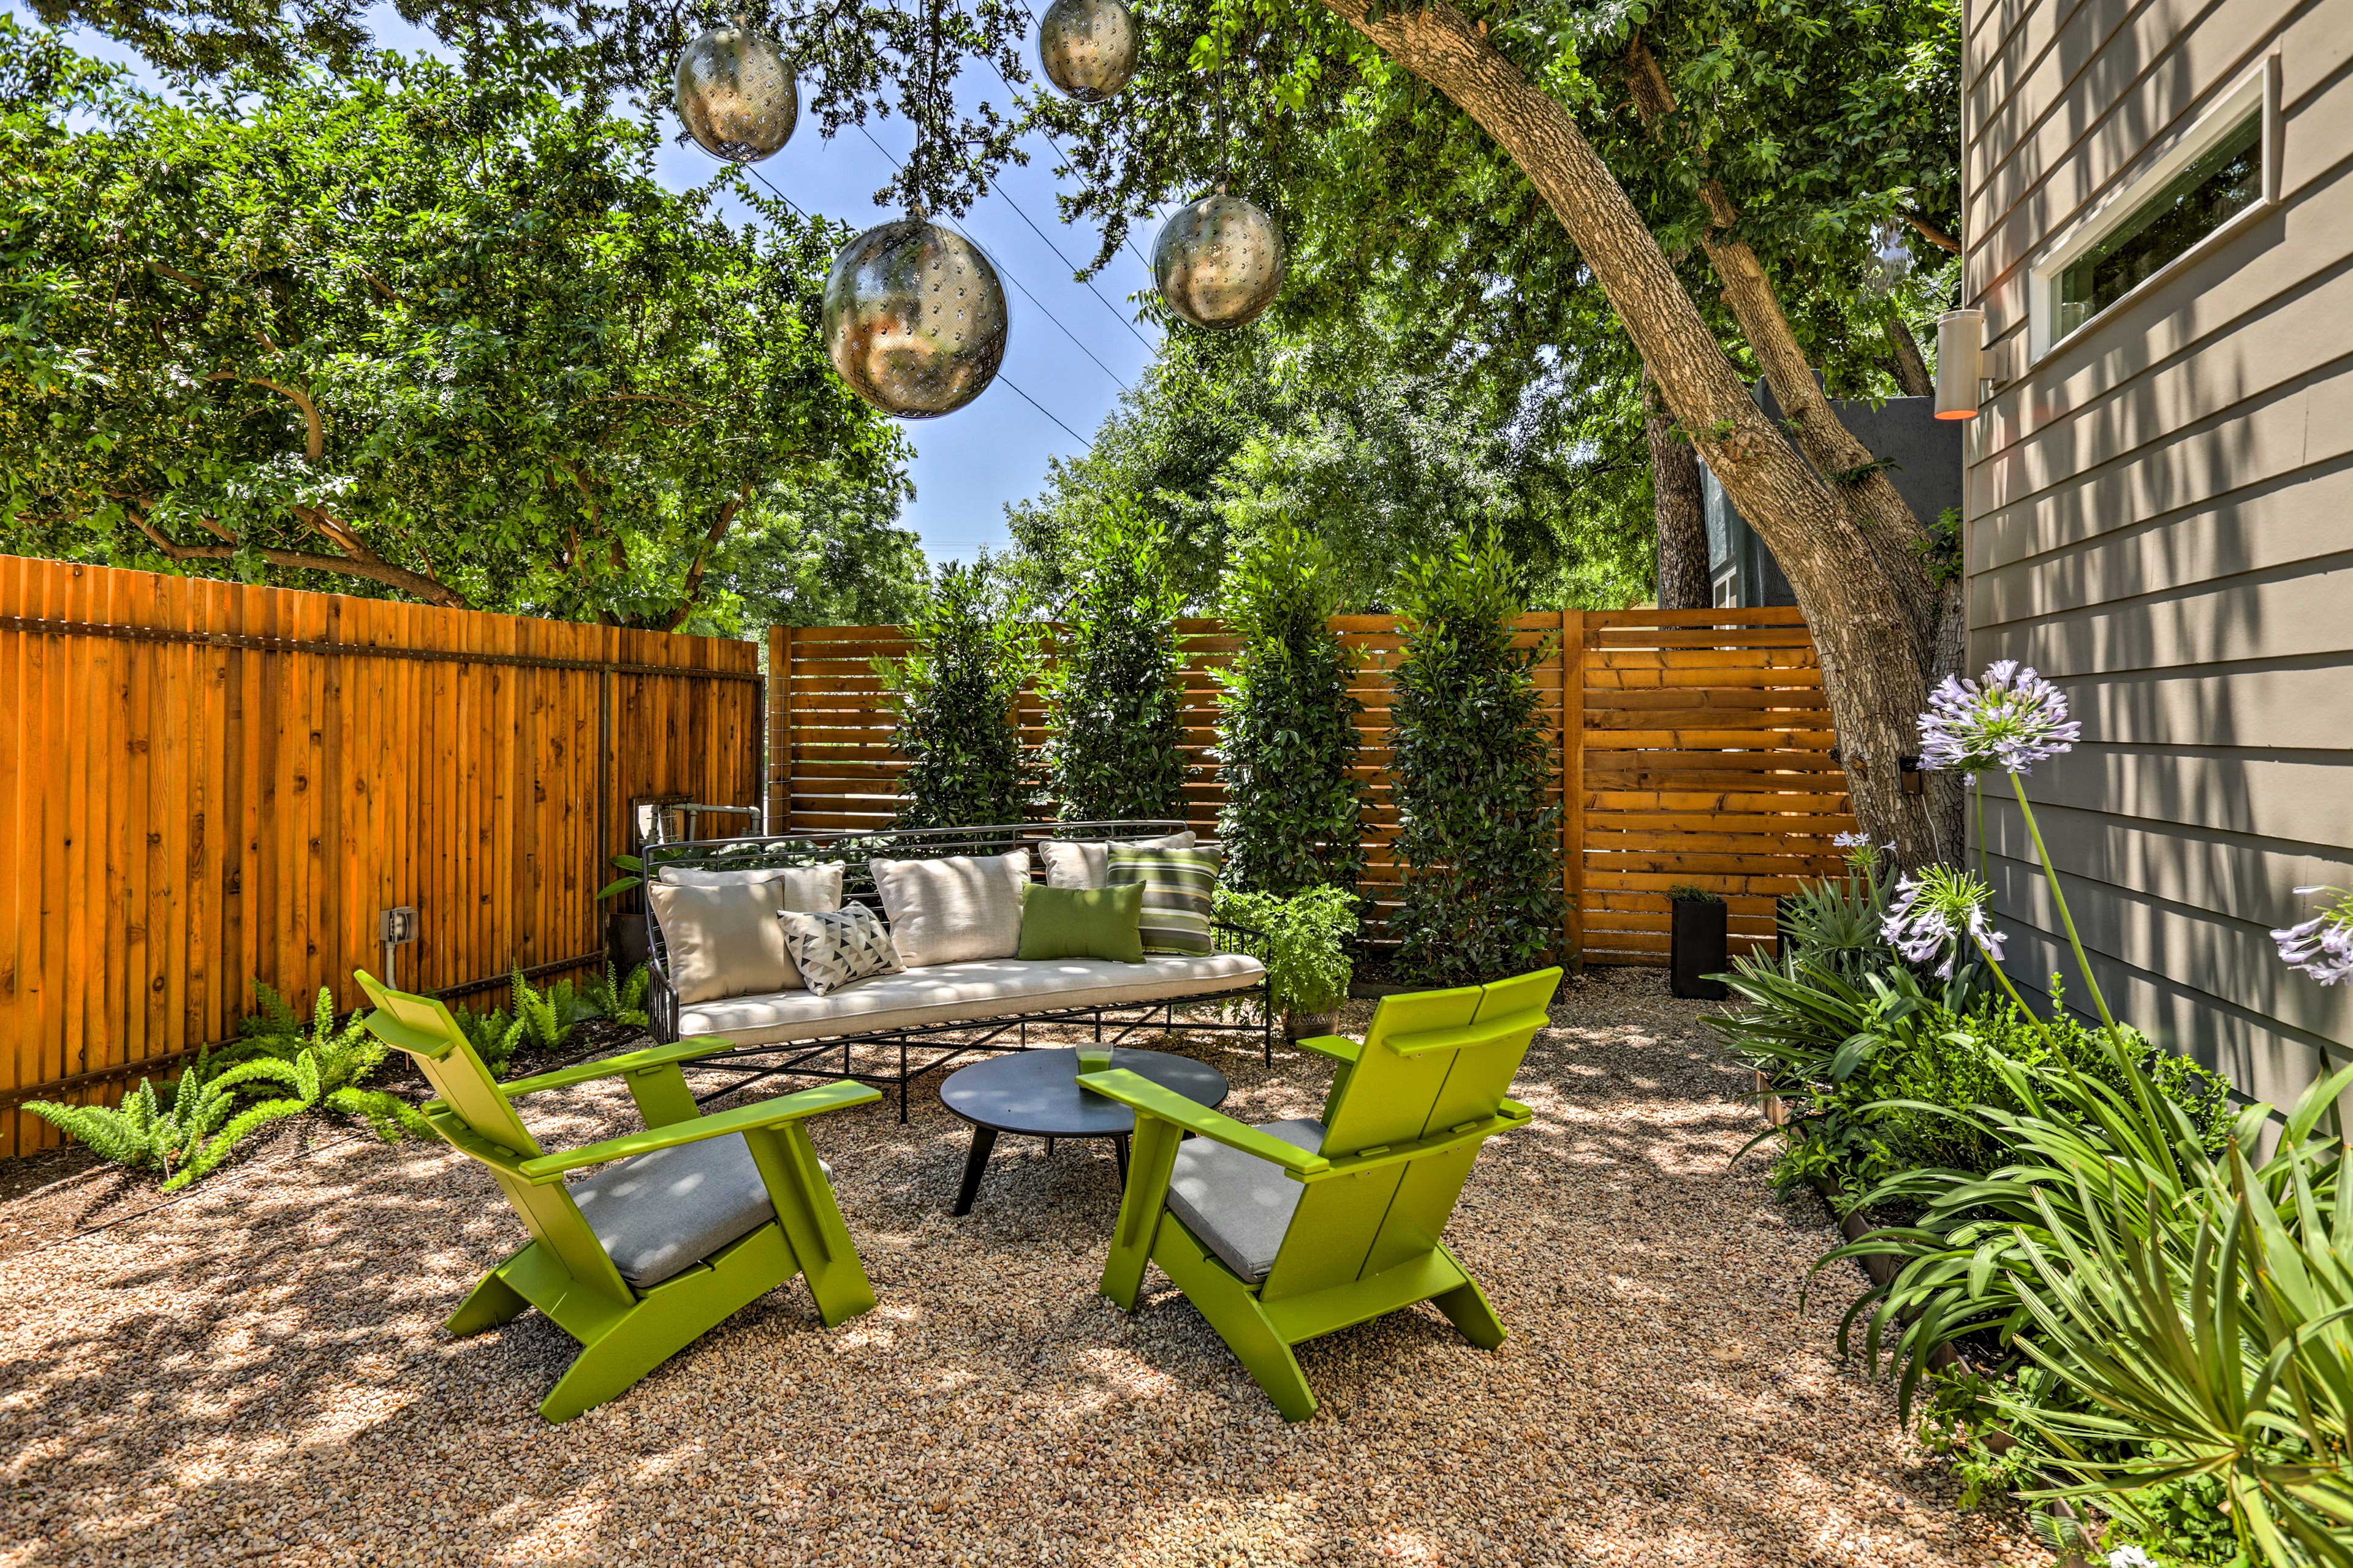 This serene outdoor space will easily become your group’s favorite hangout.